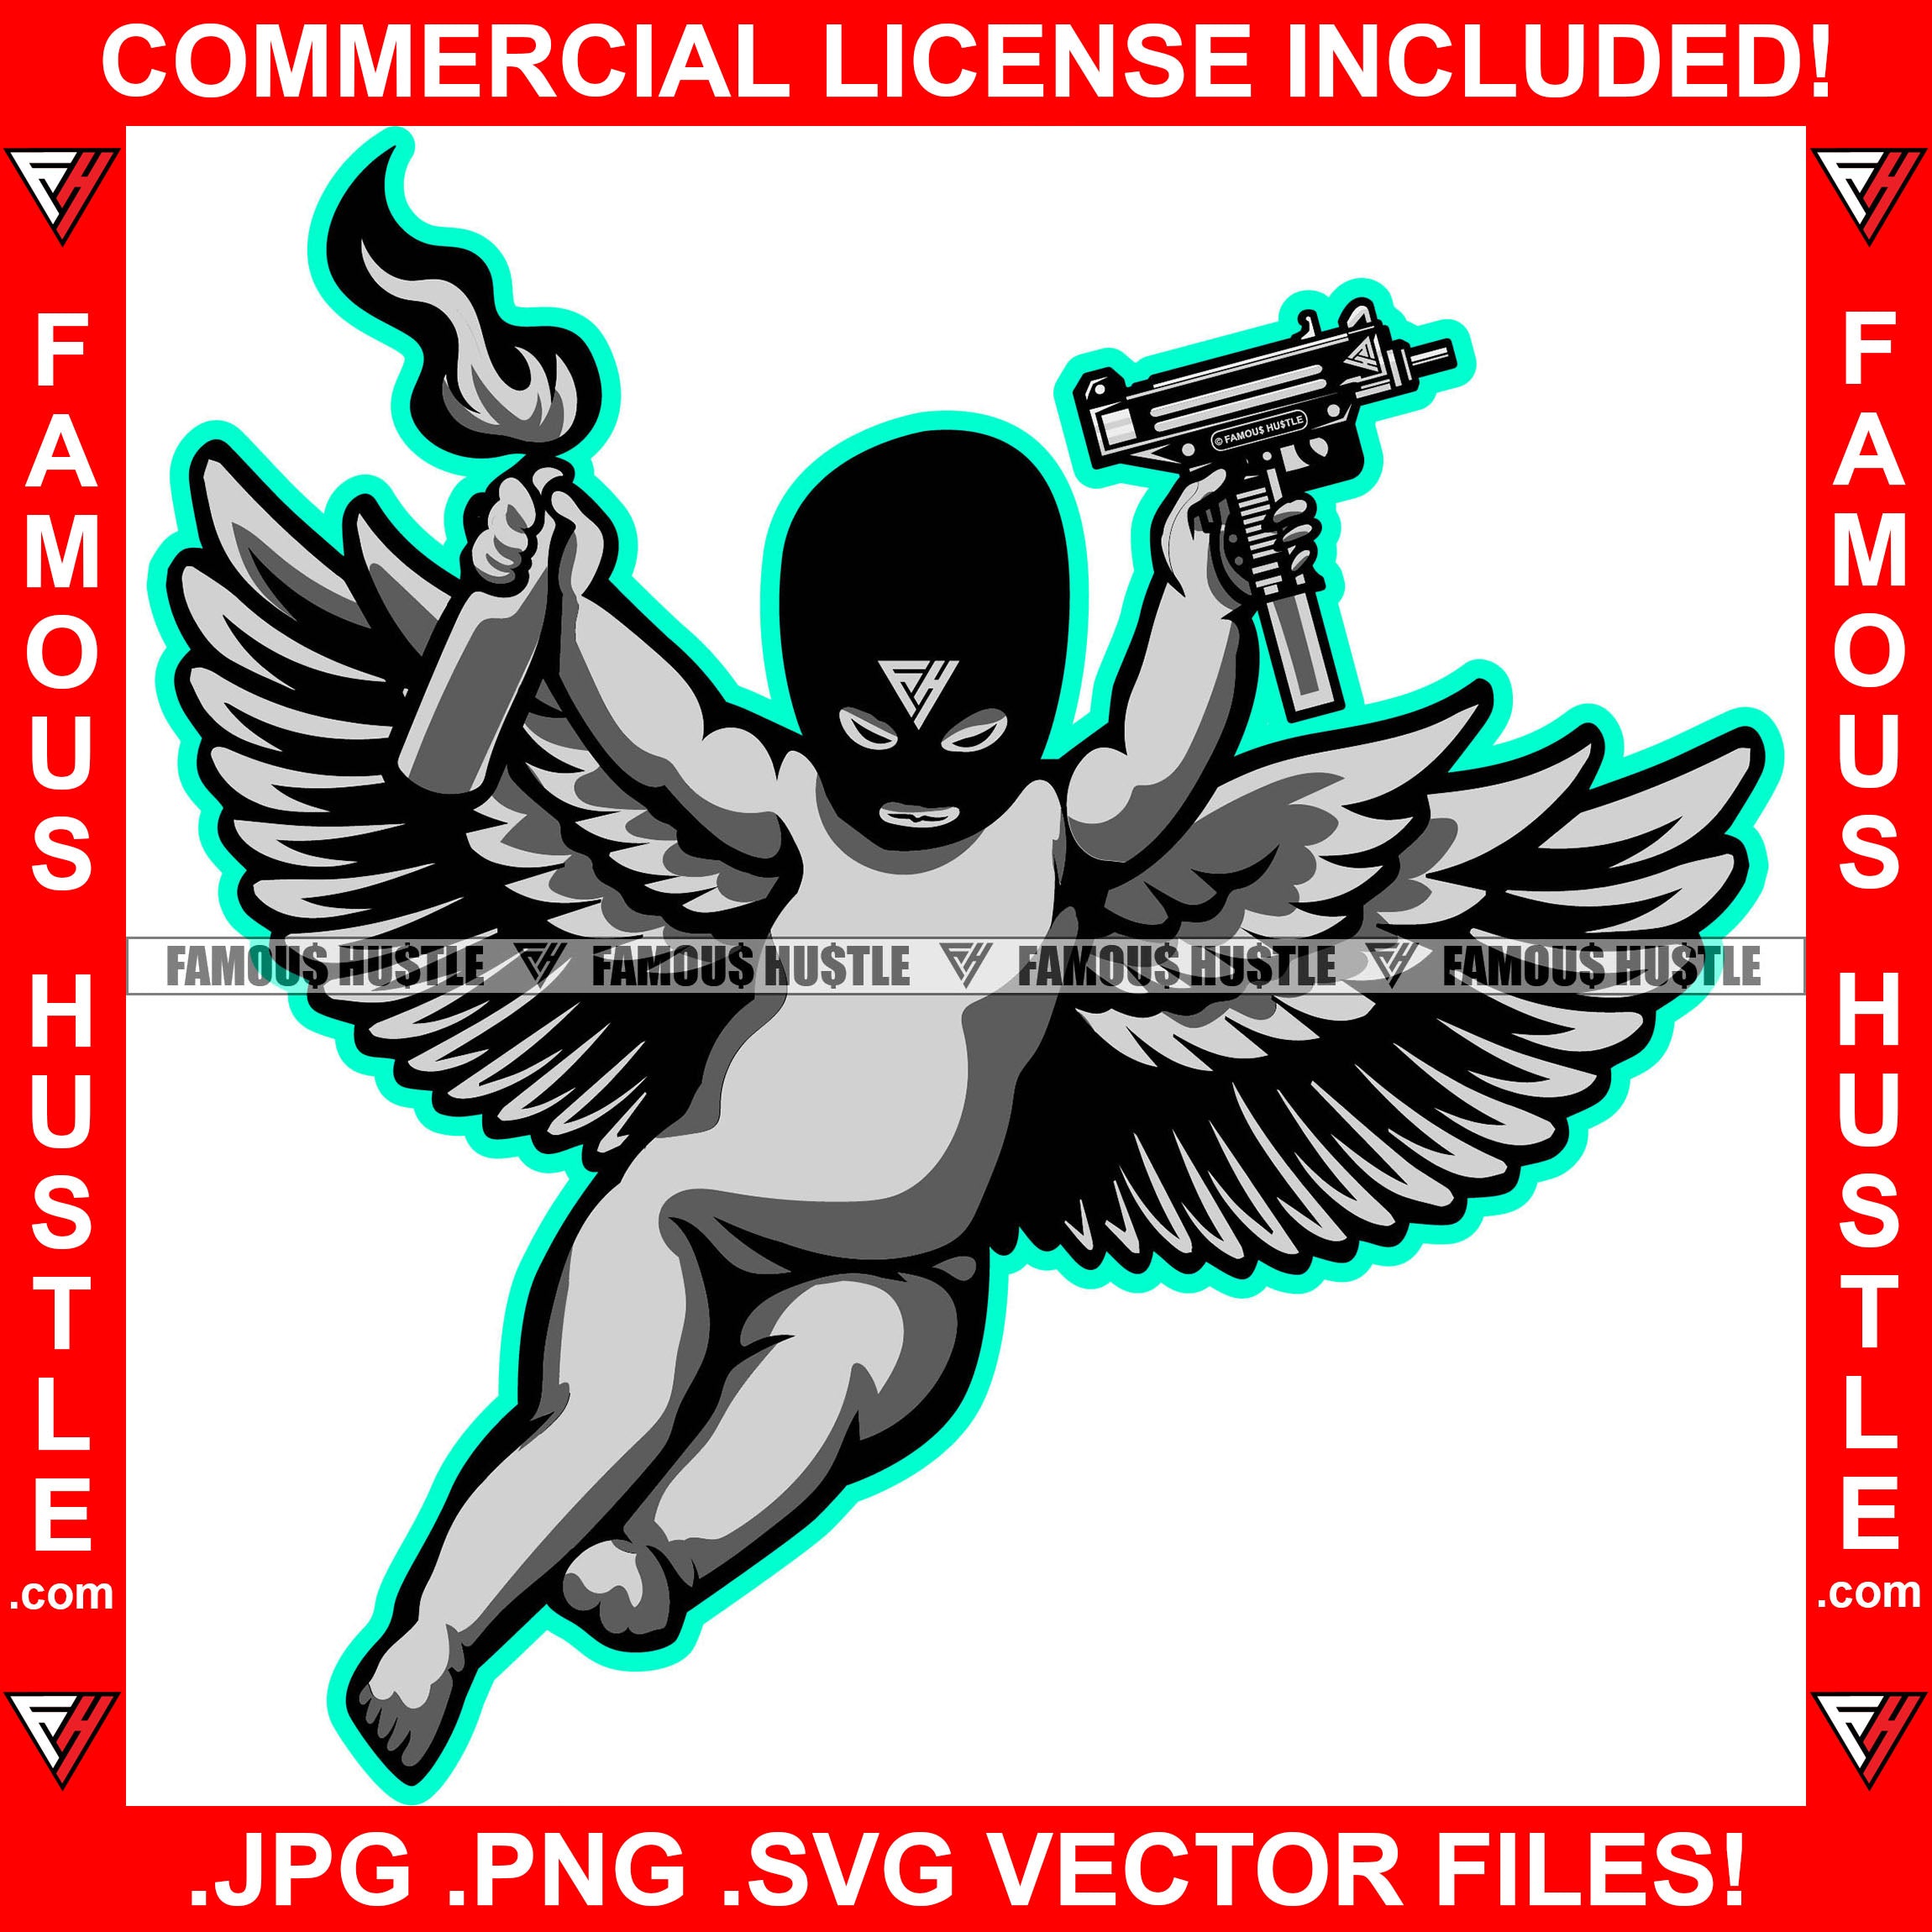 Vintage Chicano Tattoo Concept In LA Letters Shape With Pretty Girls  Gangster Skull Angel Wings Dice Diamond Money Snake Skeleton Hand Holding  Gun And Hand With Tattoo Machine Vector Illustration Royalty Free